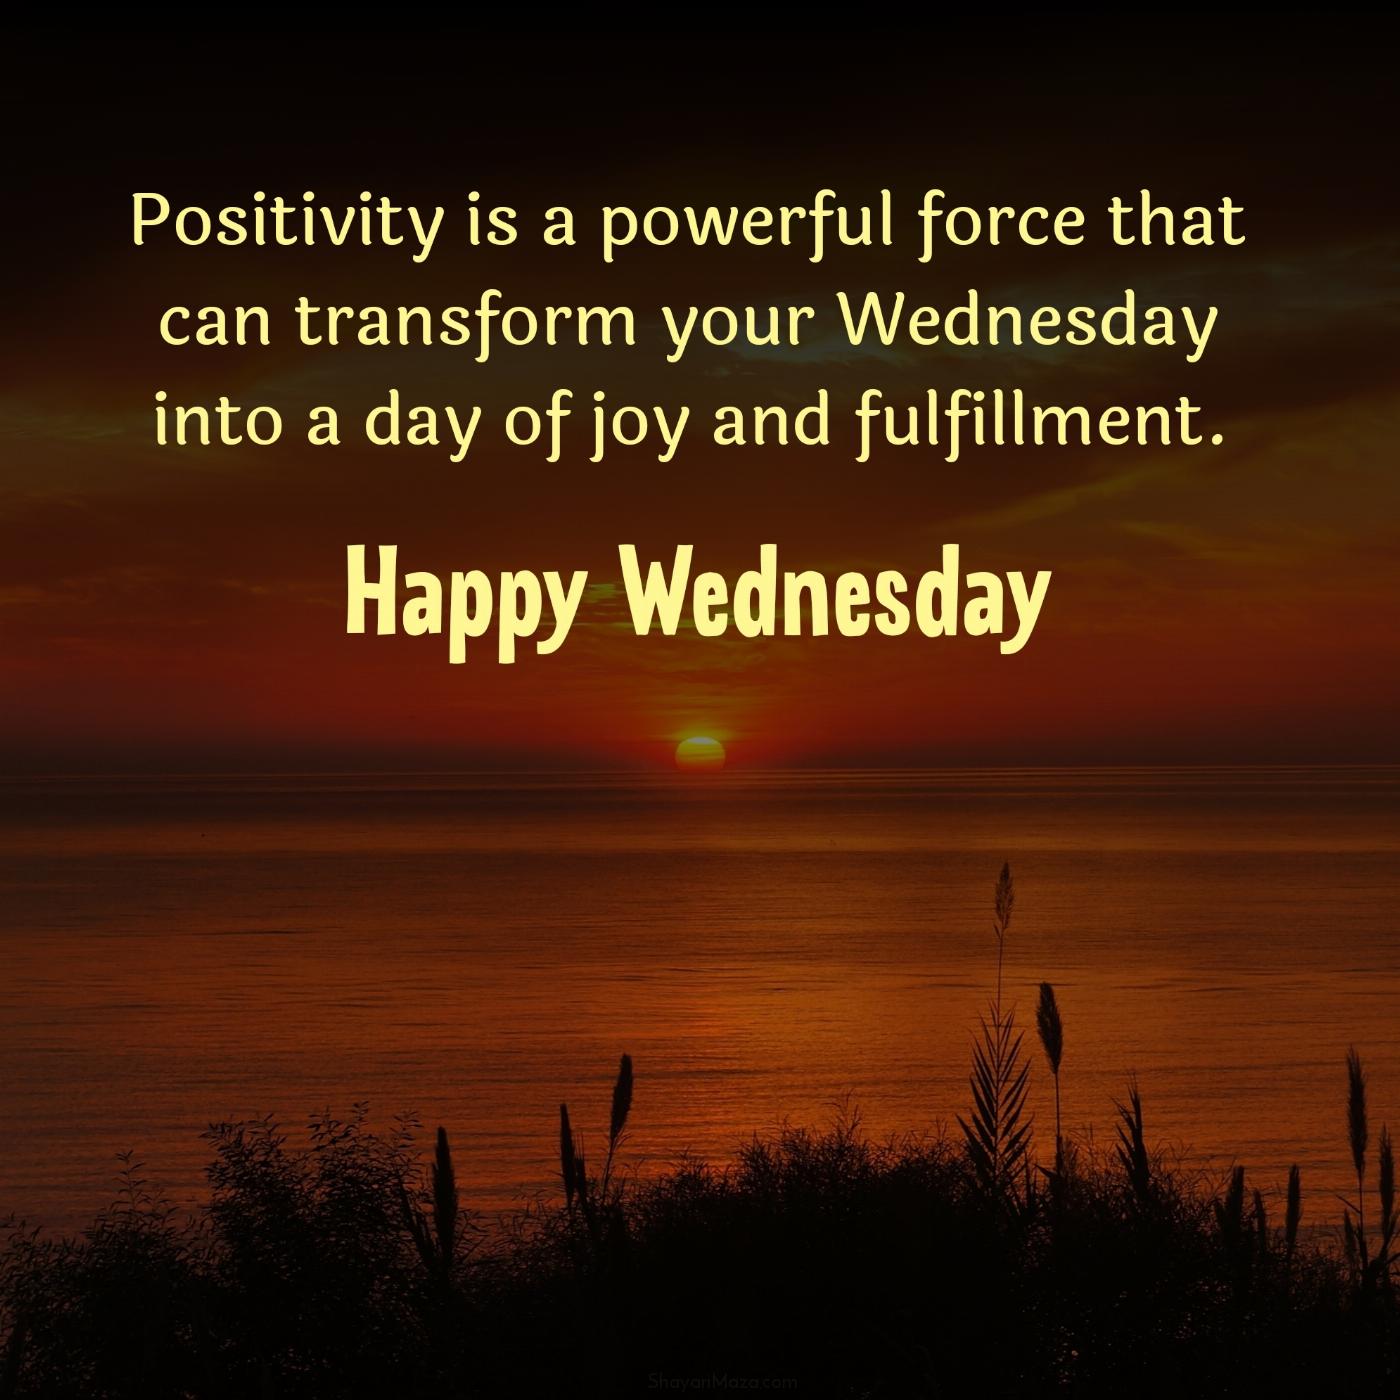 Positivity is a powerful force that can transform your Wednesday